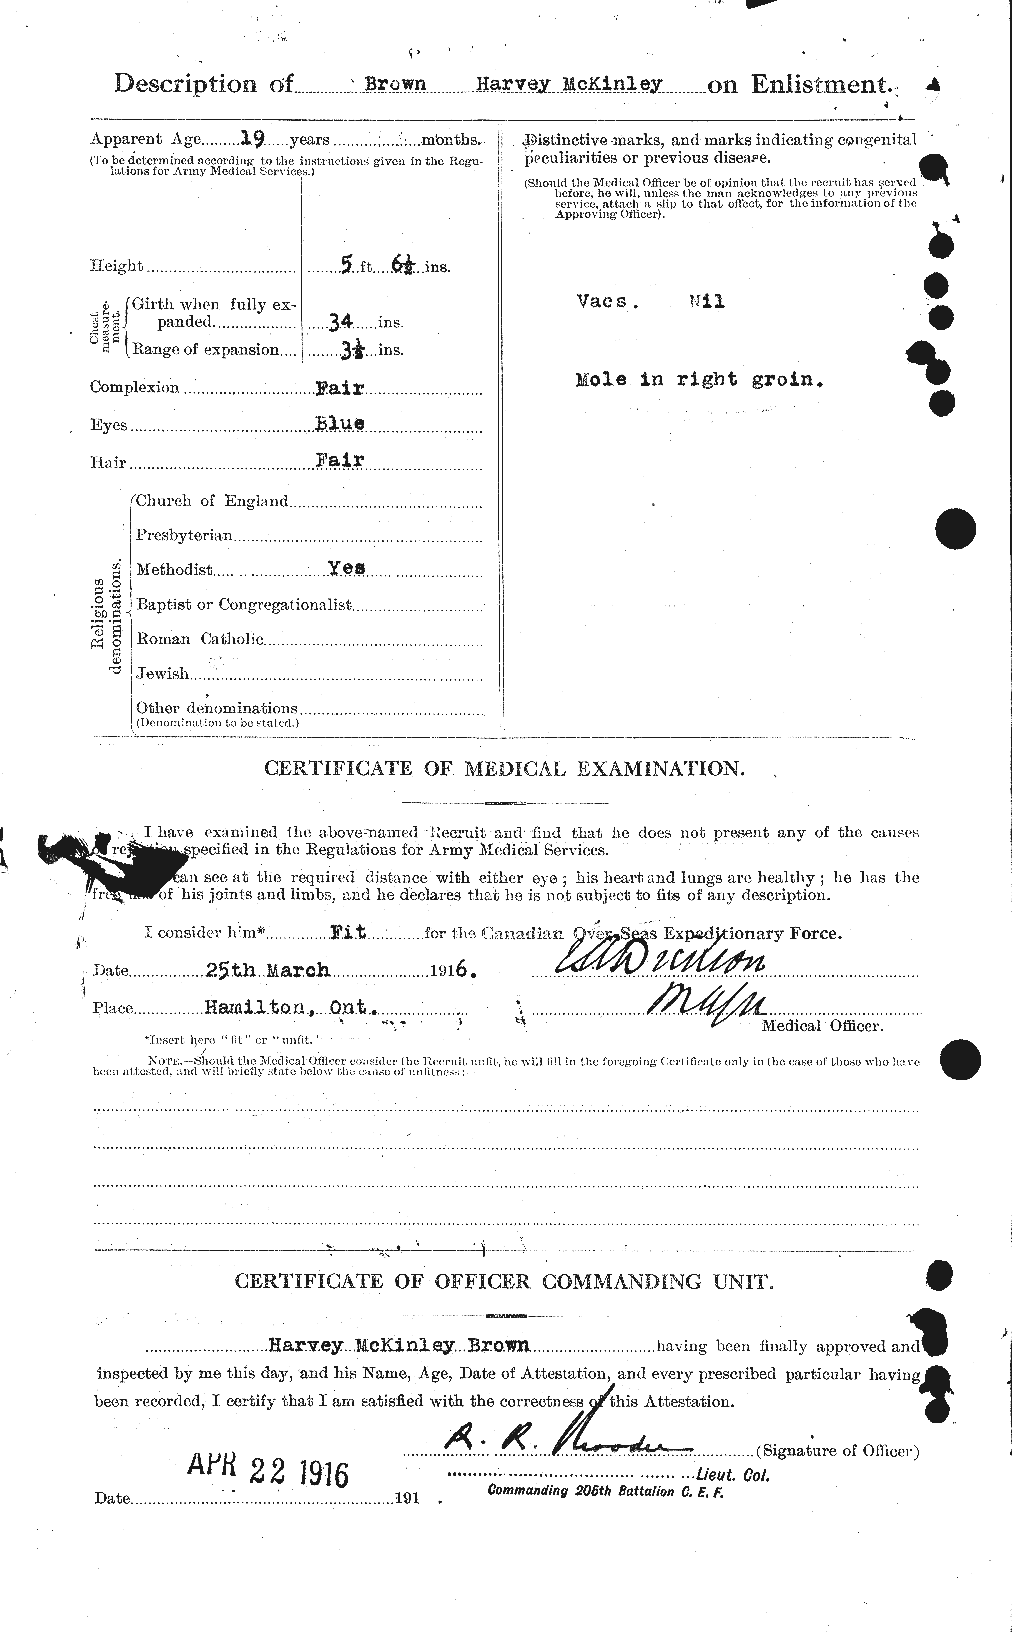 Personnel Records of the First World War - CEF 265489b